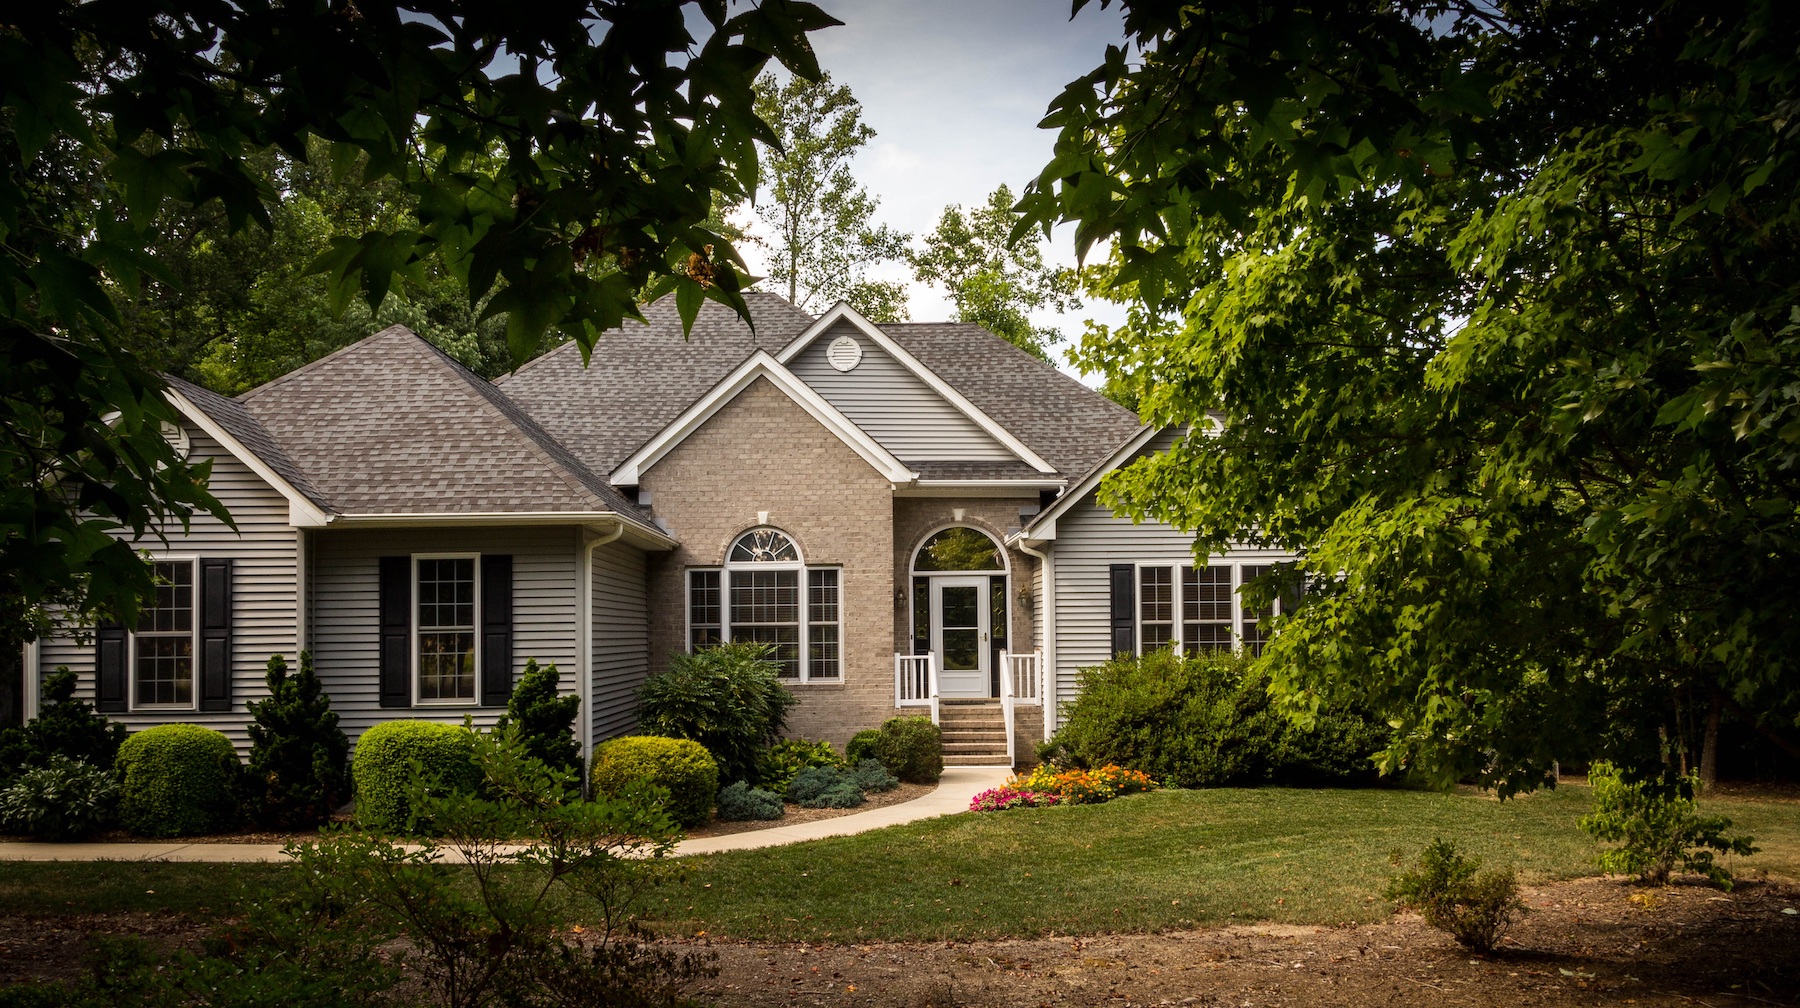 Protect your Baton Rouge home inside and out with smart home systems.